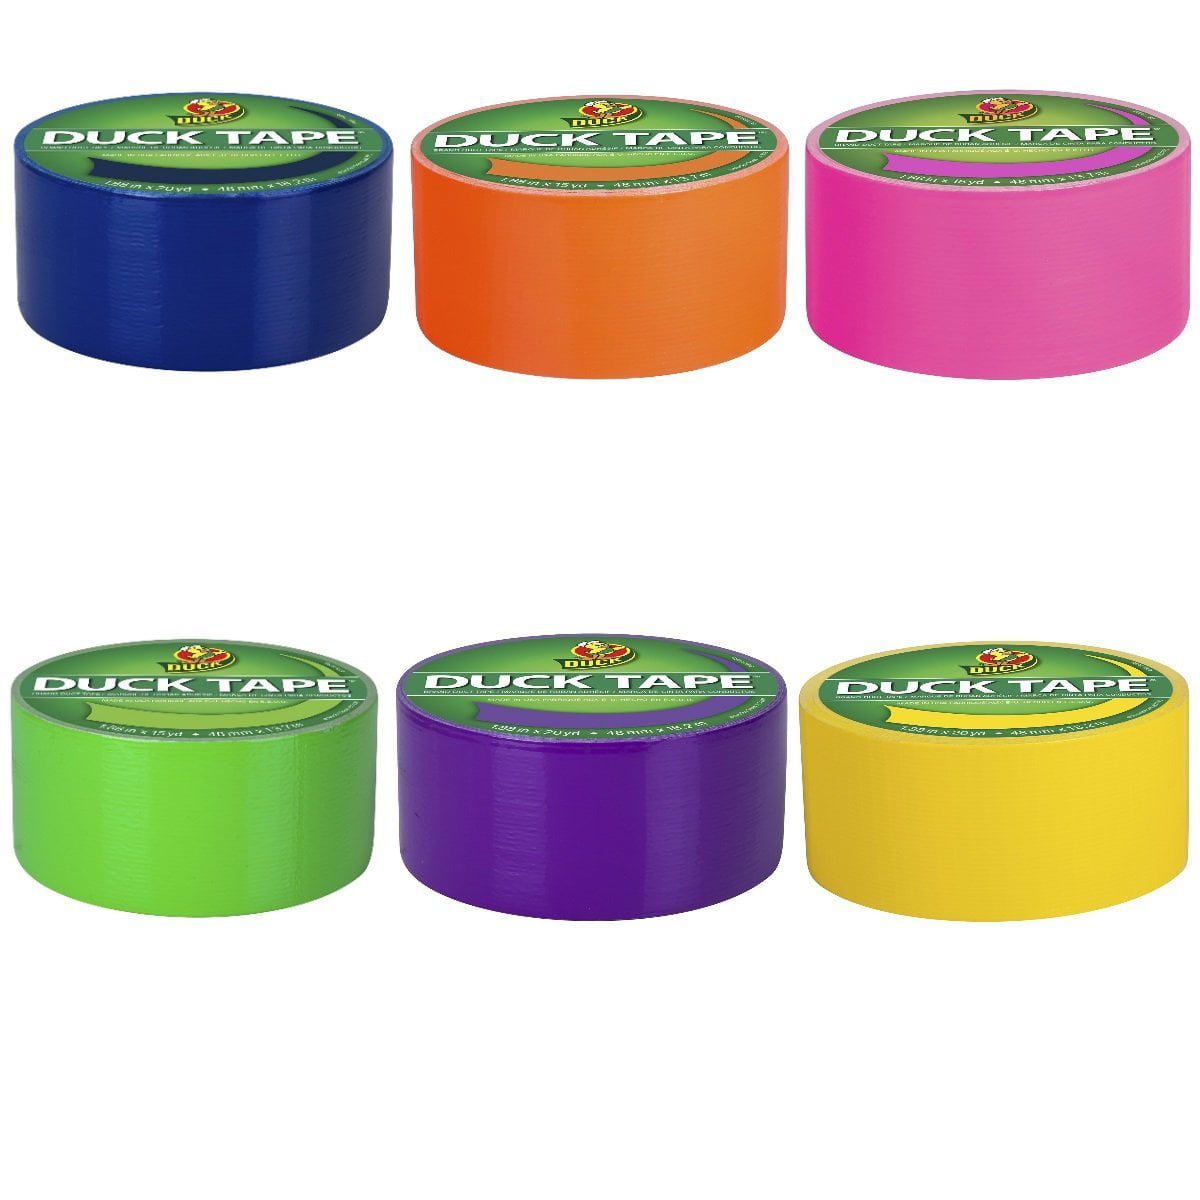 Giftexpress 6 Assorted Colored Duct Tapes - Multi Purposes Bright Colors Tapes Great for DIY Art Home School Office Assorted Colors 2 inch Roll by 10